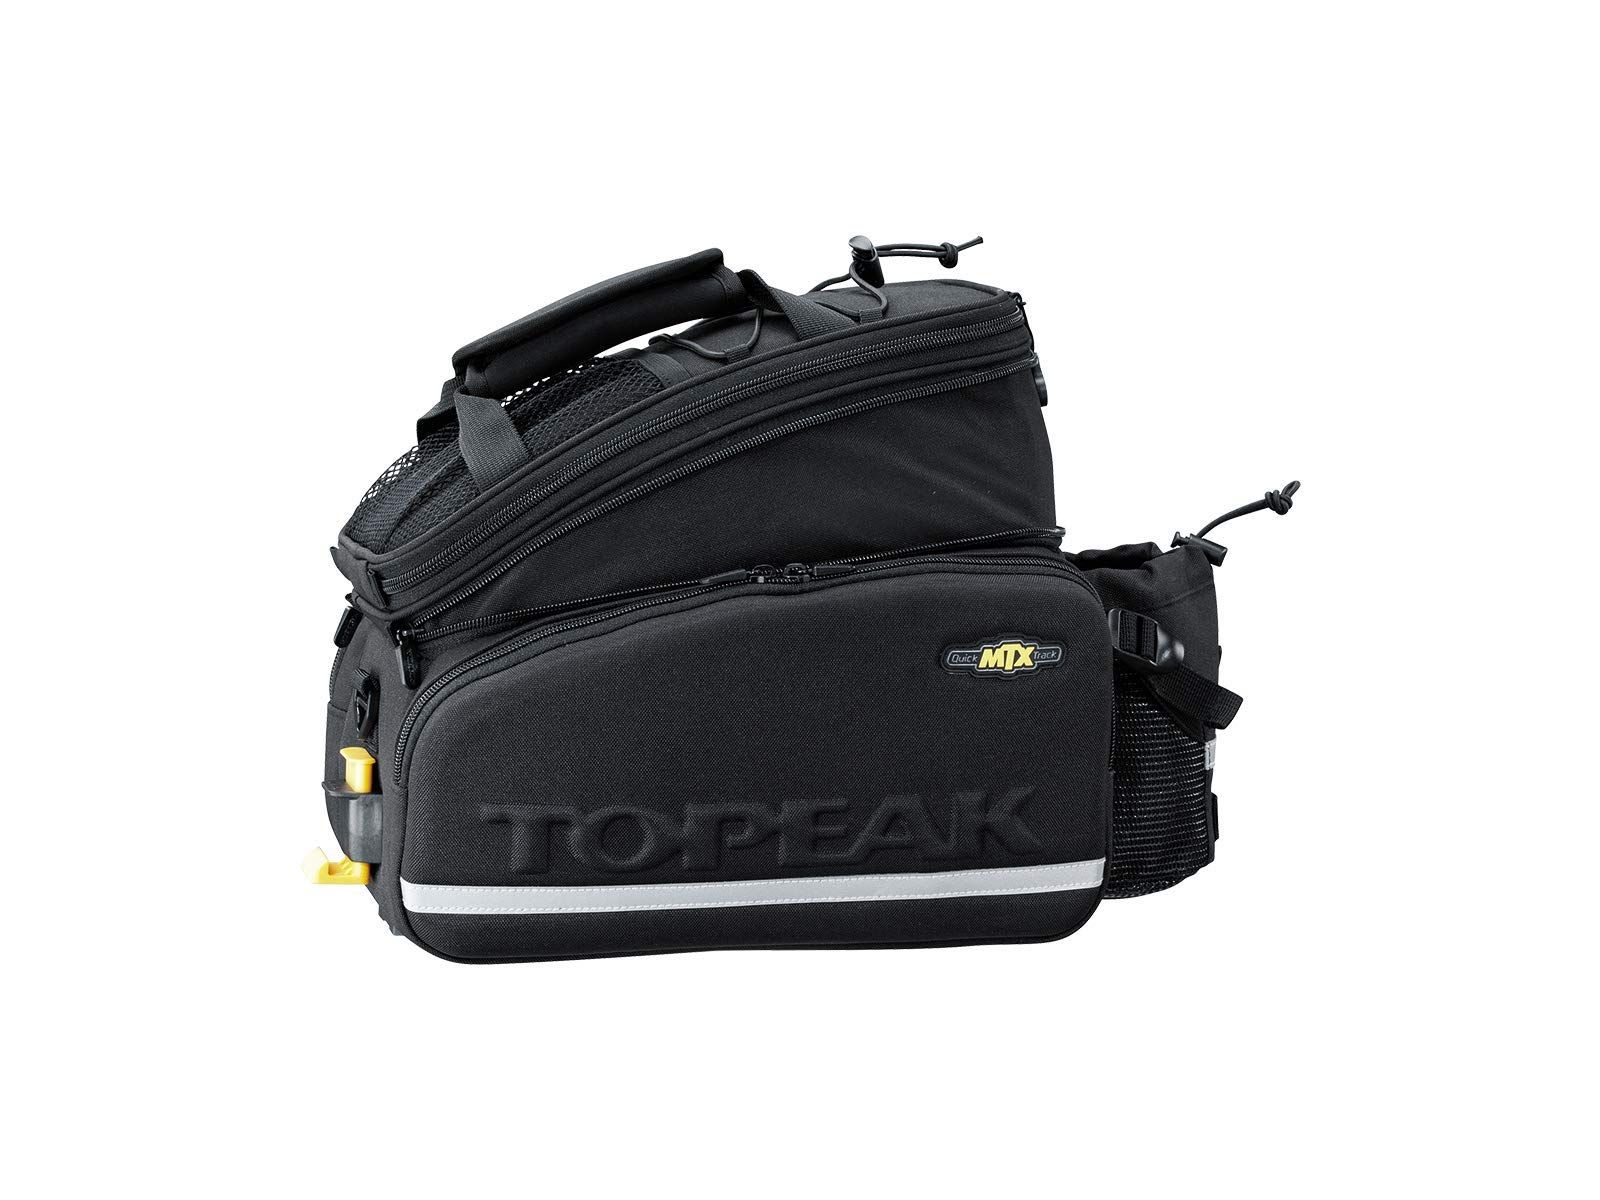 <p><strong>$83.06</strong></p><p>The Topeak MTX stands out due to a heavy-duty build and ease of use. Once the <a href="https://www.amazon.com/Topeak-Unisexs-Quicktrack-Black-OneSize/dp/B081DHC3J9/ref=pd_day0fbt_vft_none_sccl_1/132-9705049-2014164?pd_rd_w=z0nGc&content-id=amzn1.sym.a400618b-650b-4c39-a4fe-66c3e0813a14&pf_rd_p=a400618b-650b-4c39-a4fe-66c3e0813a14&pf_rd_r=F690VS1Q559DH6FXQPZC&pd_rd_wg=5LIJd&pd_rd_r=f1f45186-e32c-4c2d-9734-5a5b2e7dc88d&pd_rd_i=B081DHC3J9&psc=1&tag=syndication-20&ascsubtag=%5Bartid%7C2143.g.39676959%5Bsrc%7Cmsn-us">Topeak rack system</a> installed is on your bike, the bag slides on and off without a fuss. </p><p>Its robust build with molded panels and varied pocket system make this suitable for both short and long strips, providing enough carry space for everything you need for a day trip, and for the bulk of an overnighter including water, layers, and extra snacks.</p>